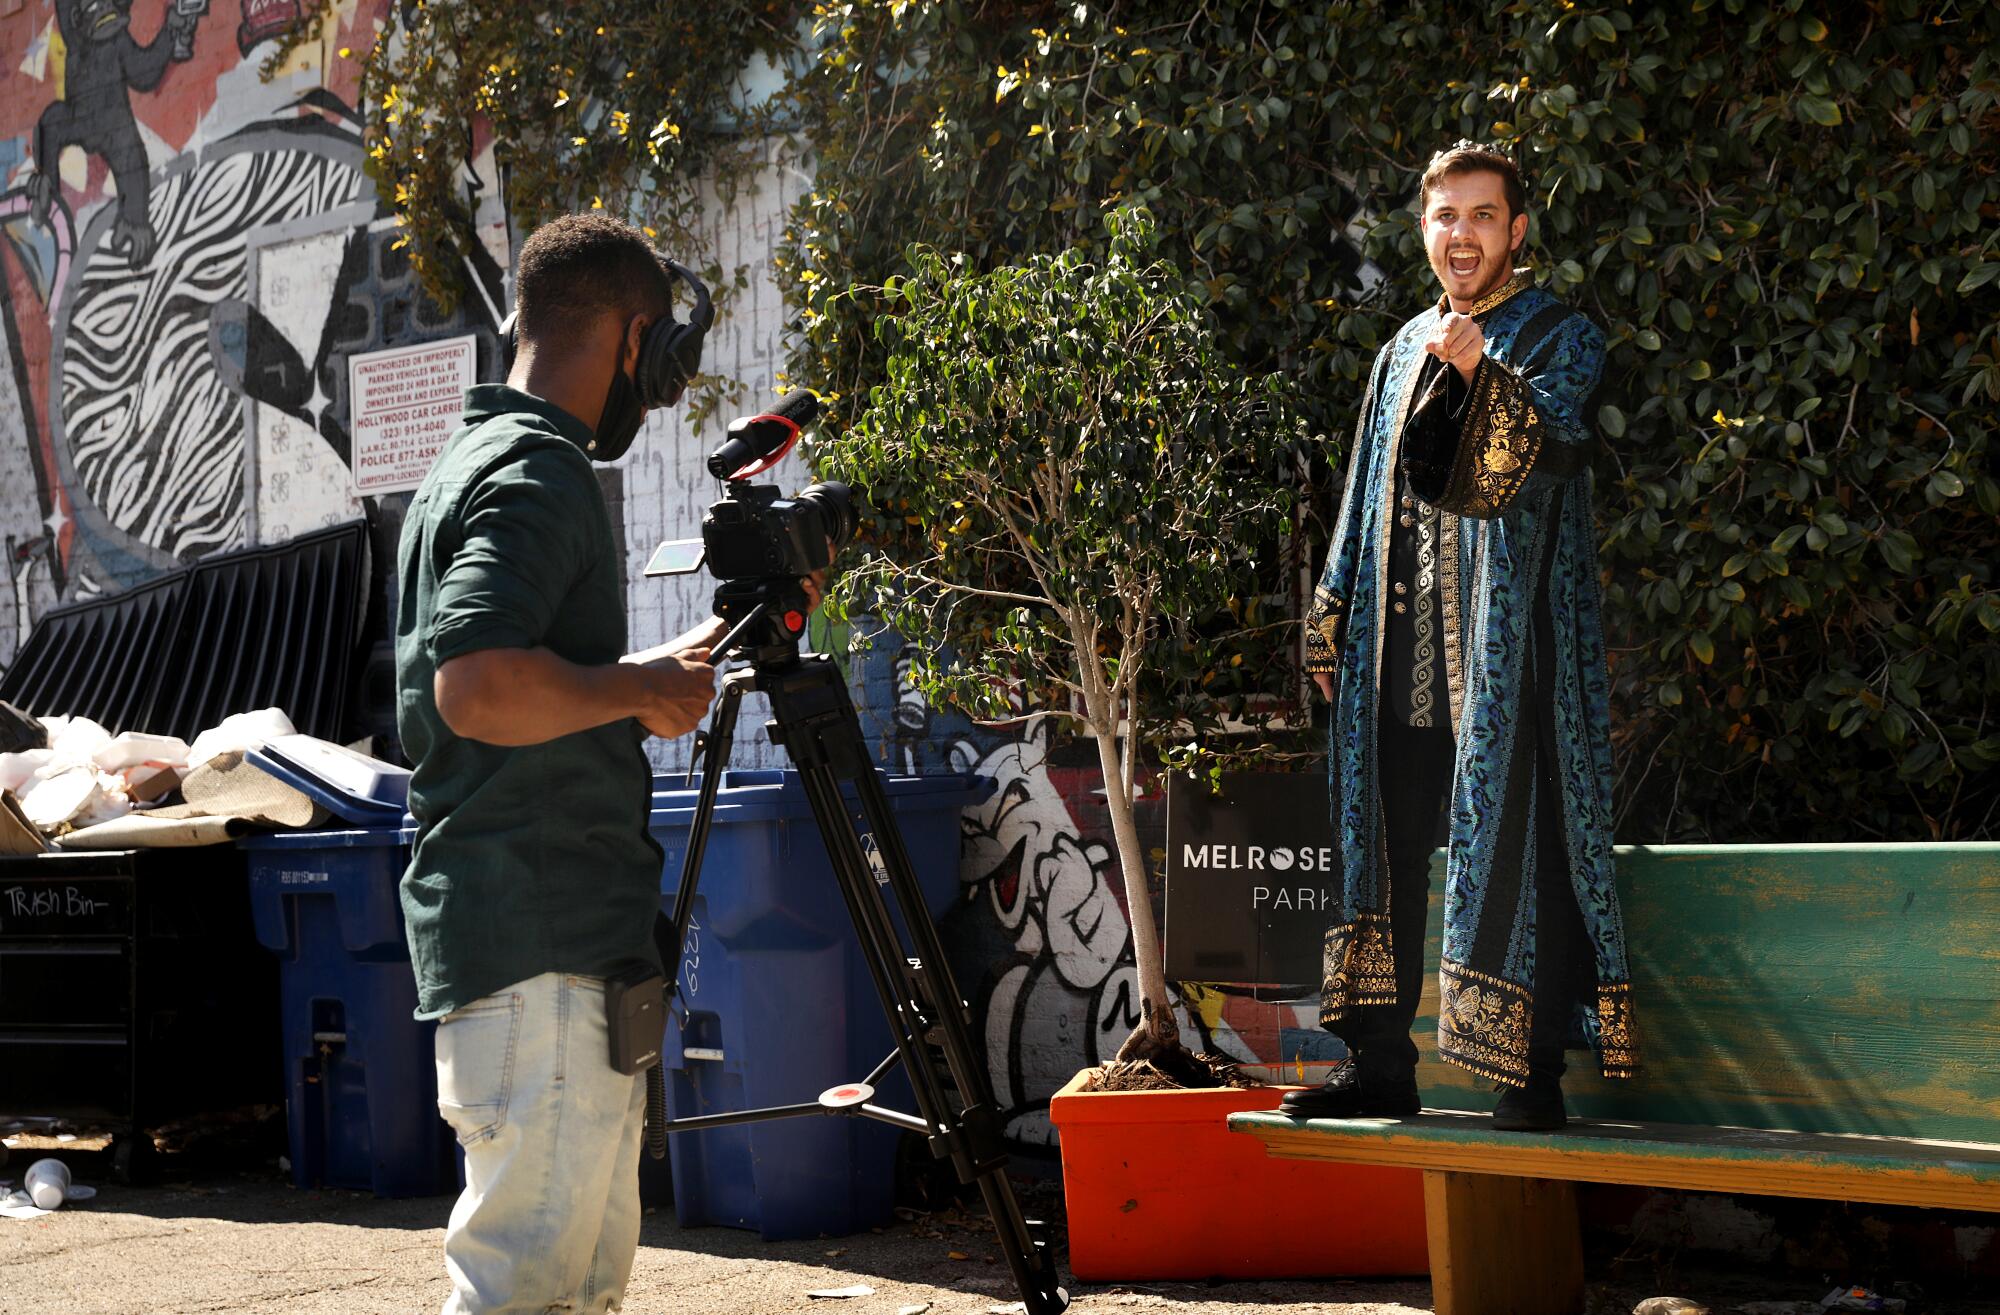 An actor in a costume robe performs a monologue on top of a bench while another man films.